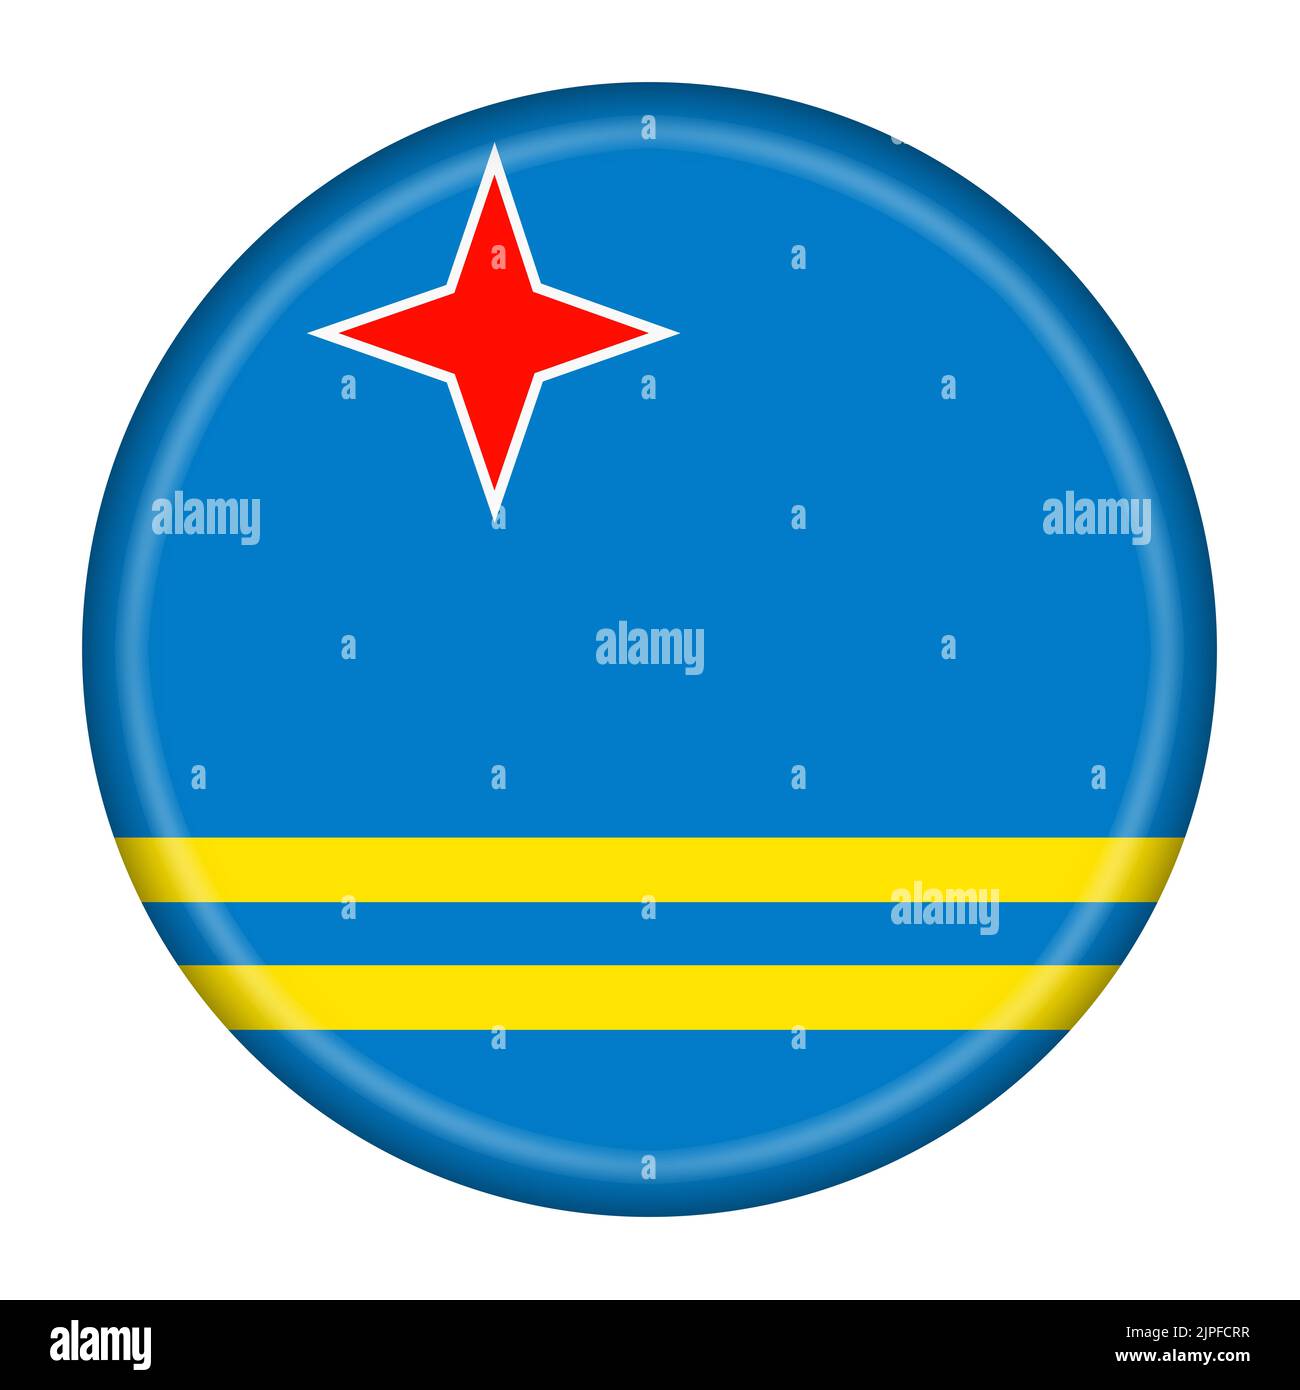 Aruba flag button 3d illustration with clipping path Stock Photo